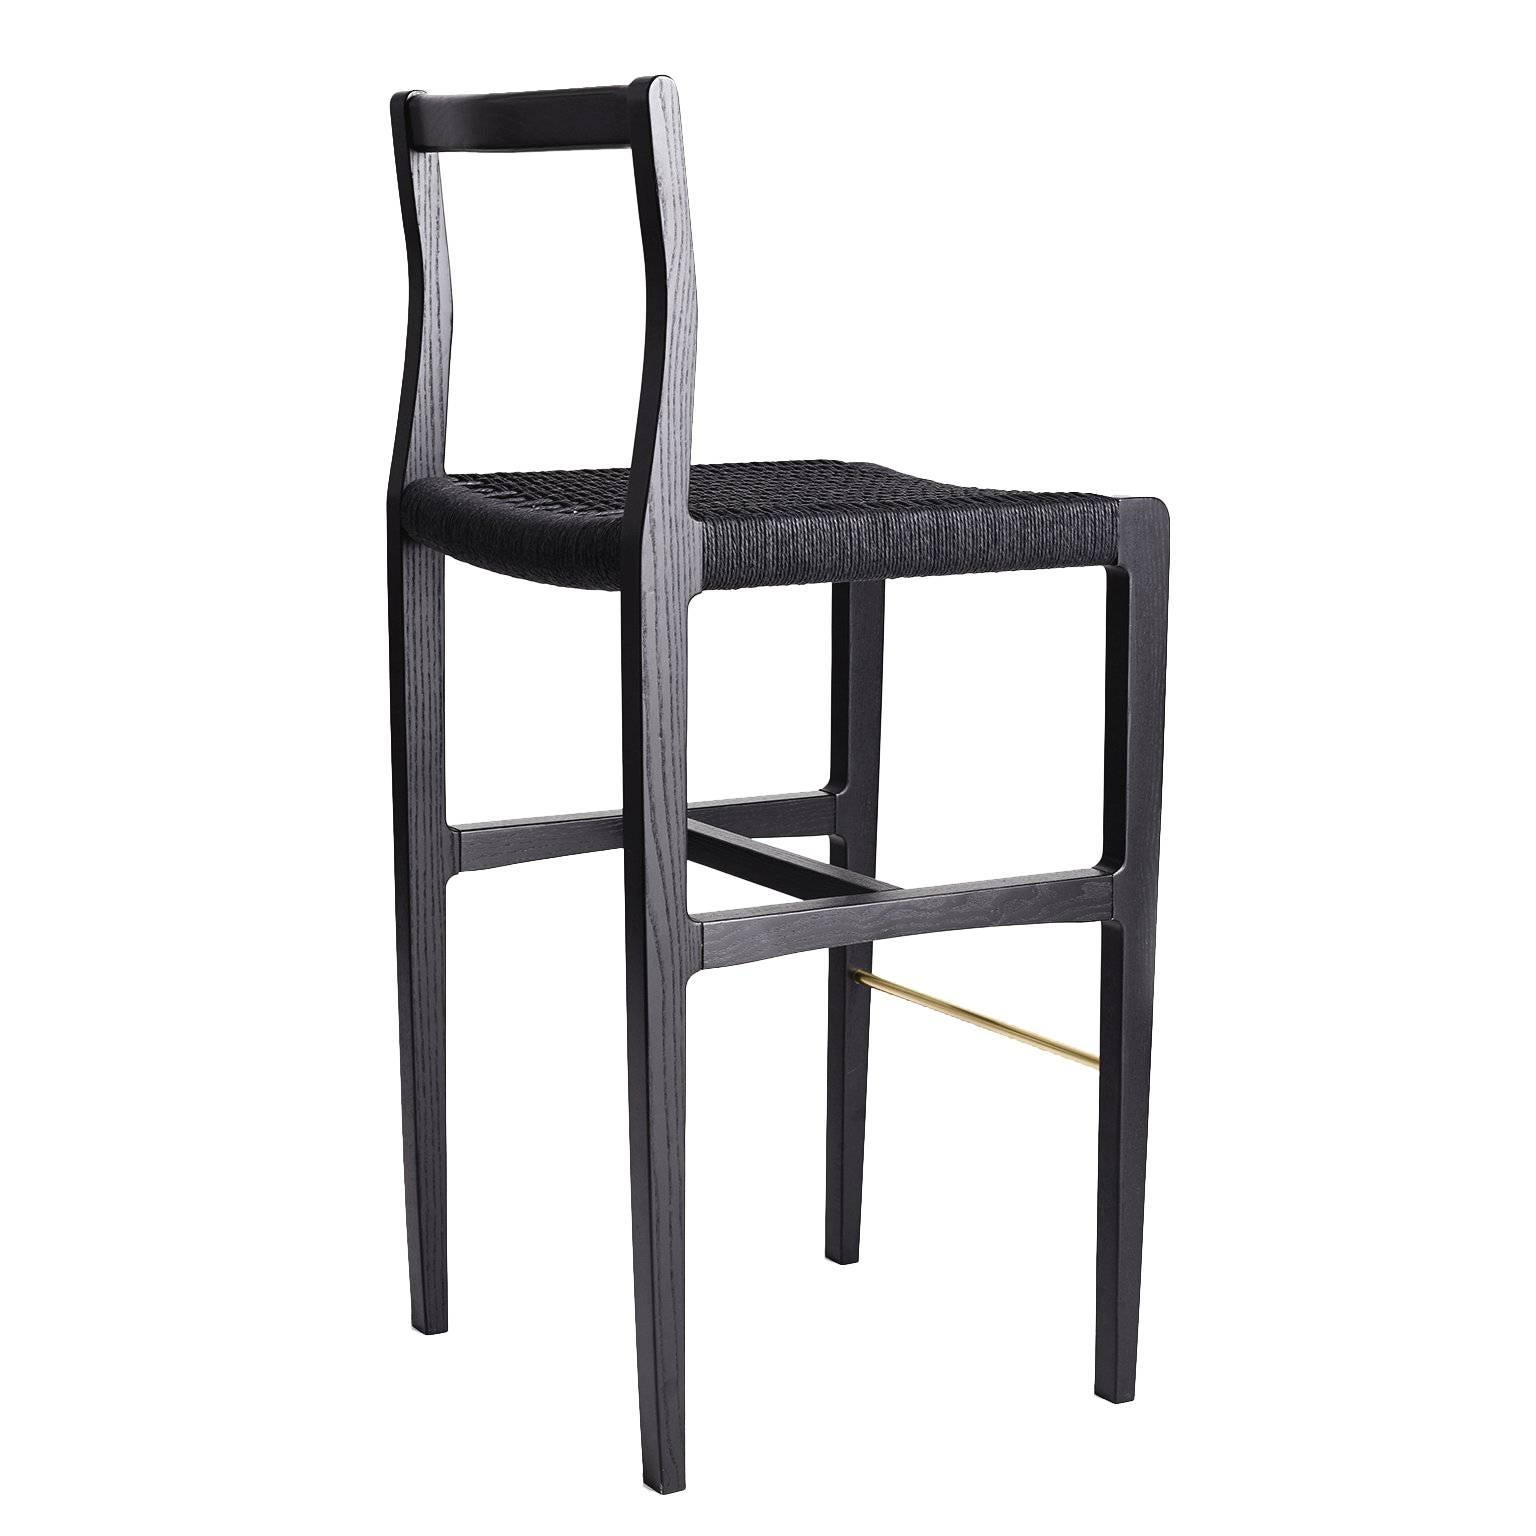 Giacomo Bar Stools (2) in Ebonized Ash - DISCOUNTED 50% - available now